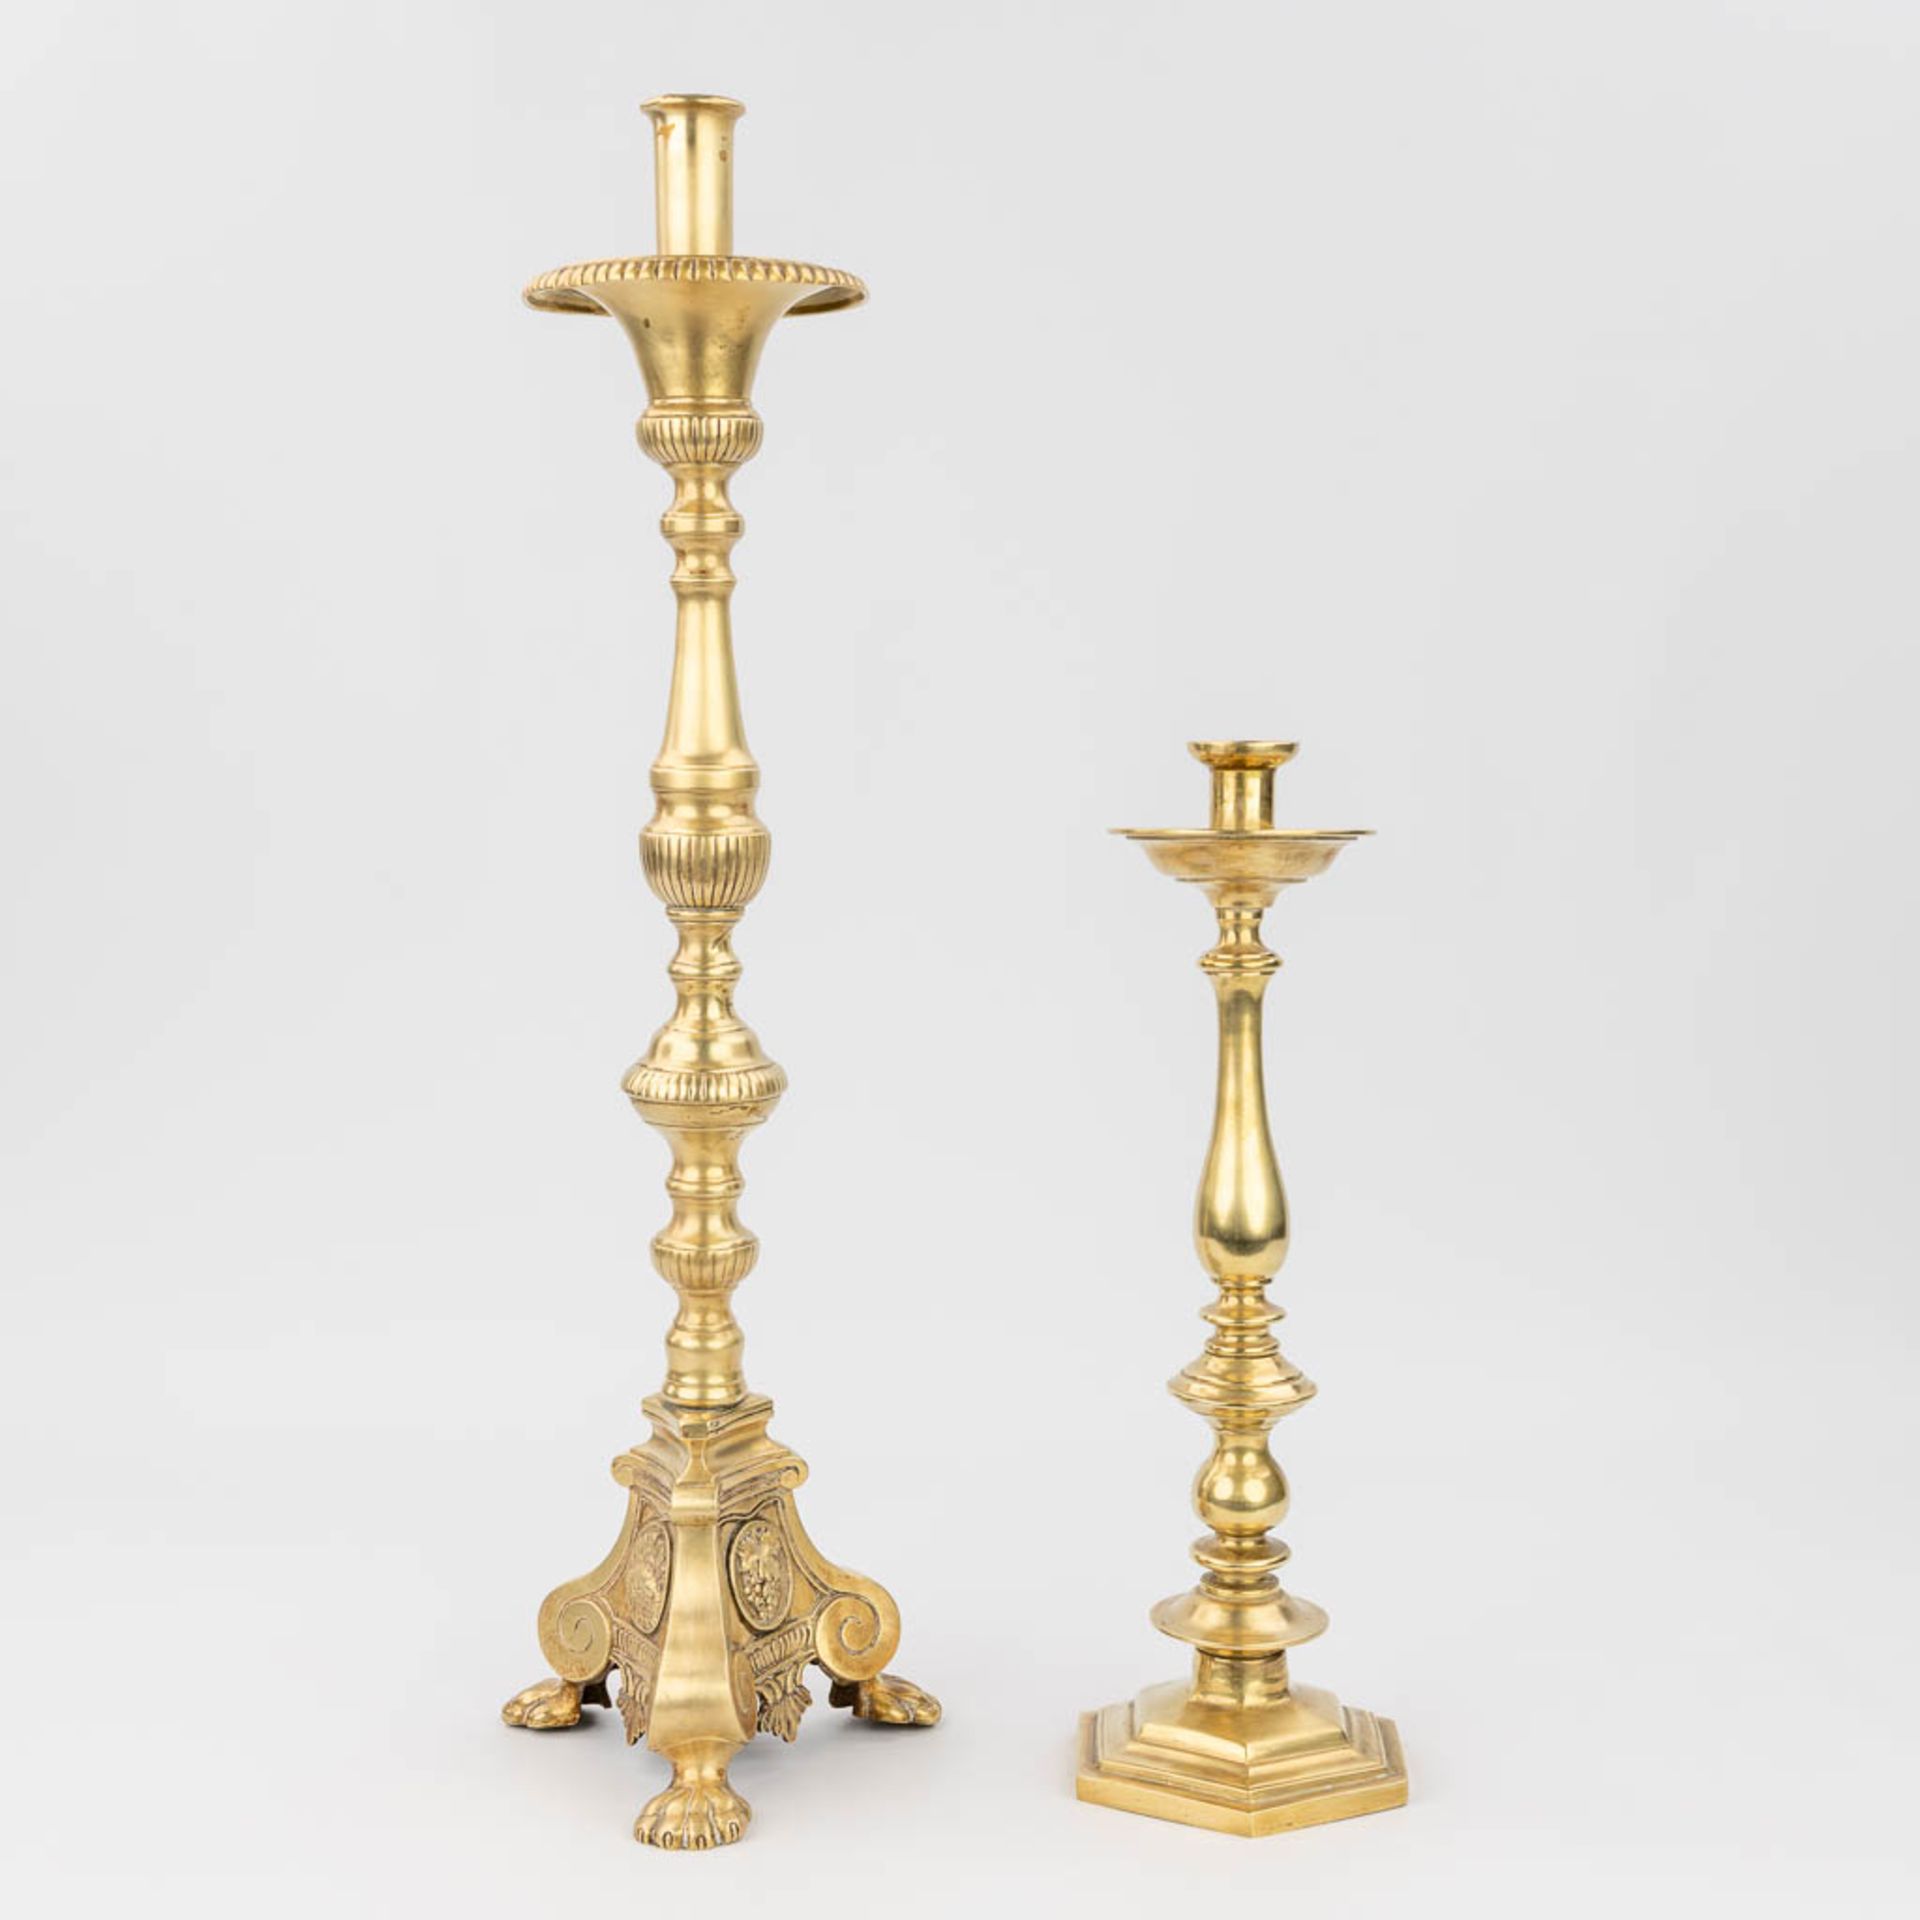 A collection of 2 candelabra made of polished bronze. (H:65 cm) - Image 6 of 14